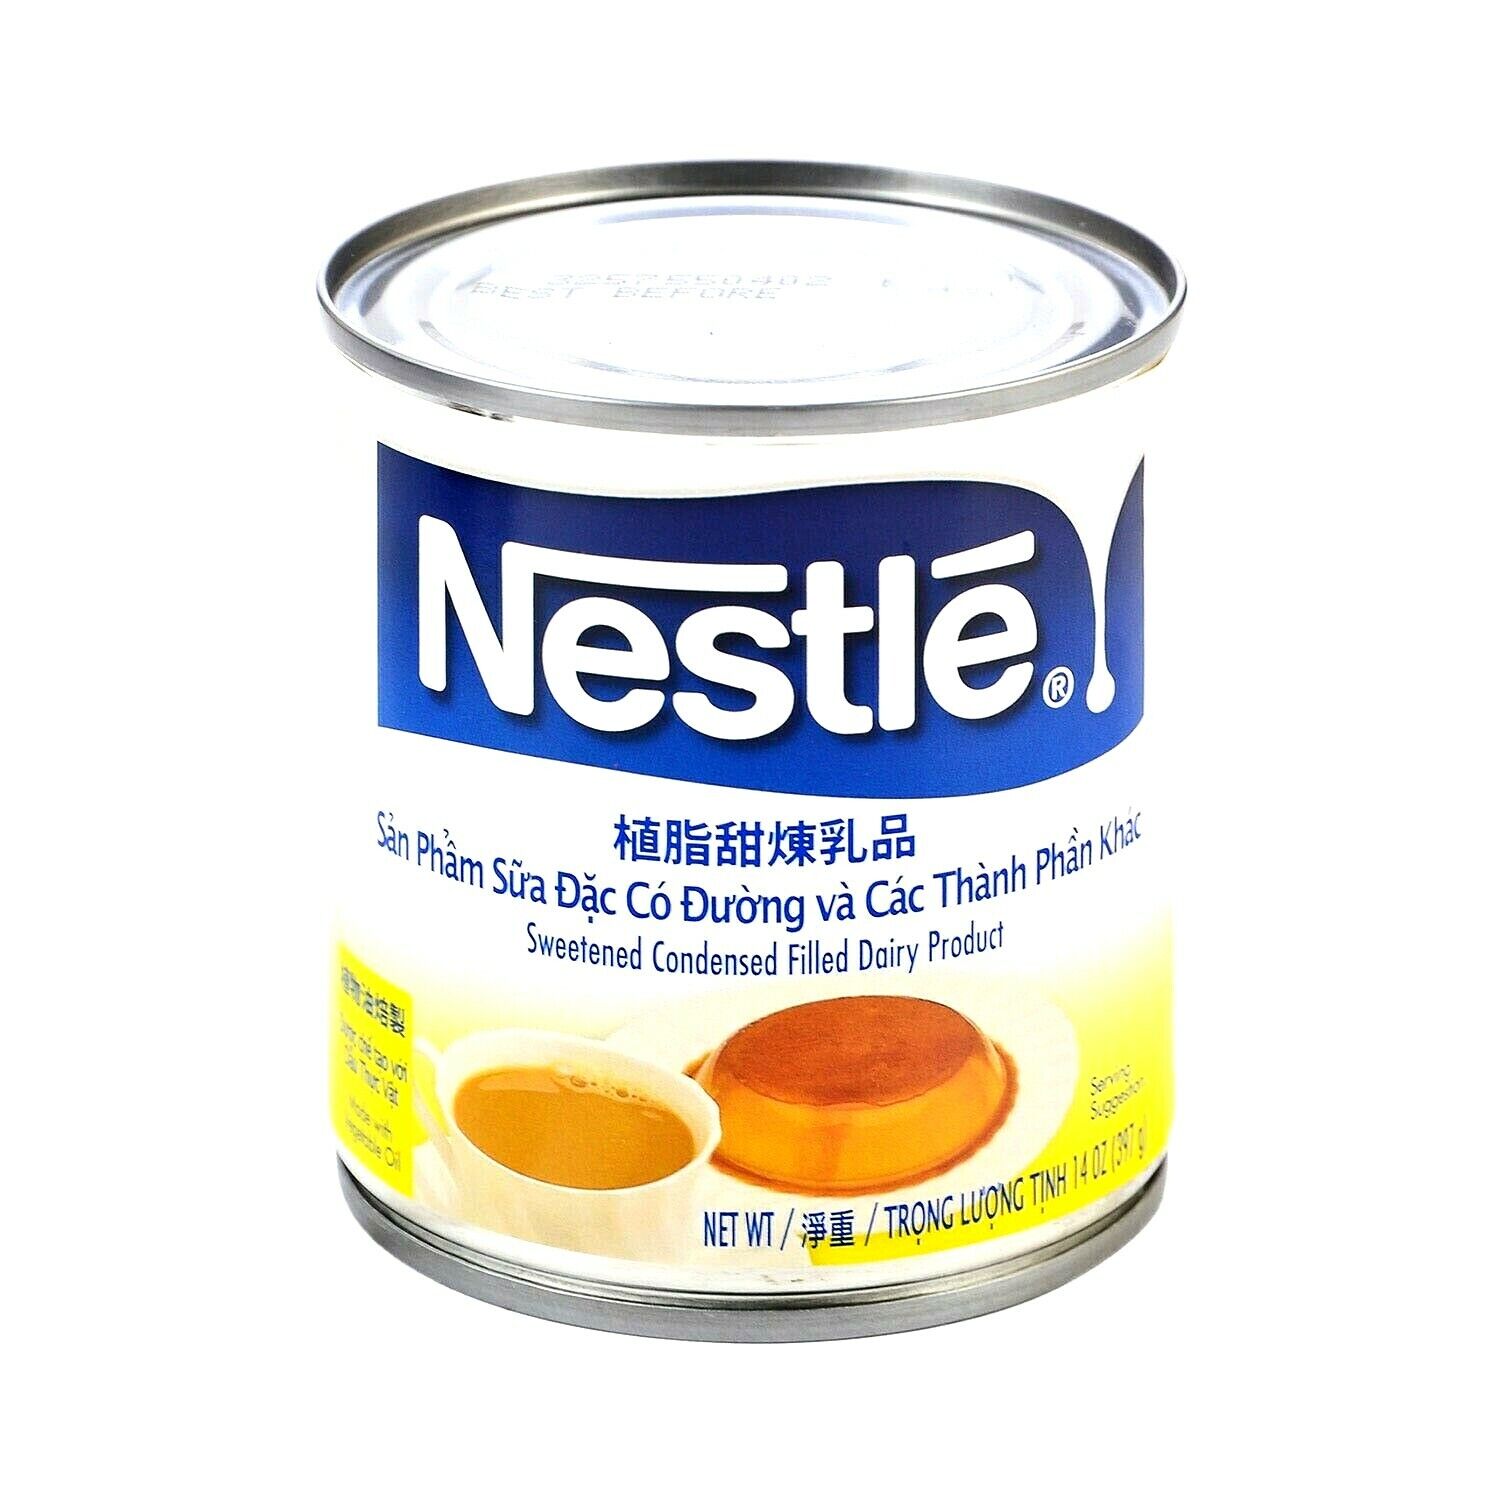 Nestle -  Sweetened Condensed Filled Dairy Product